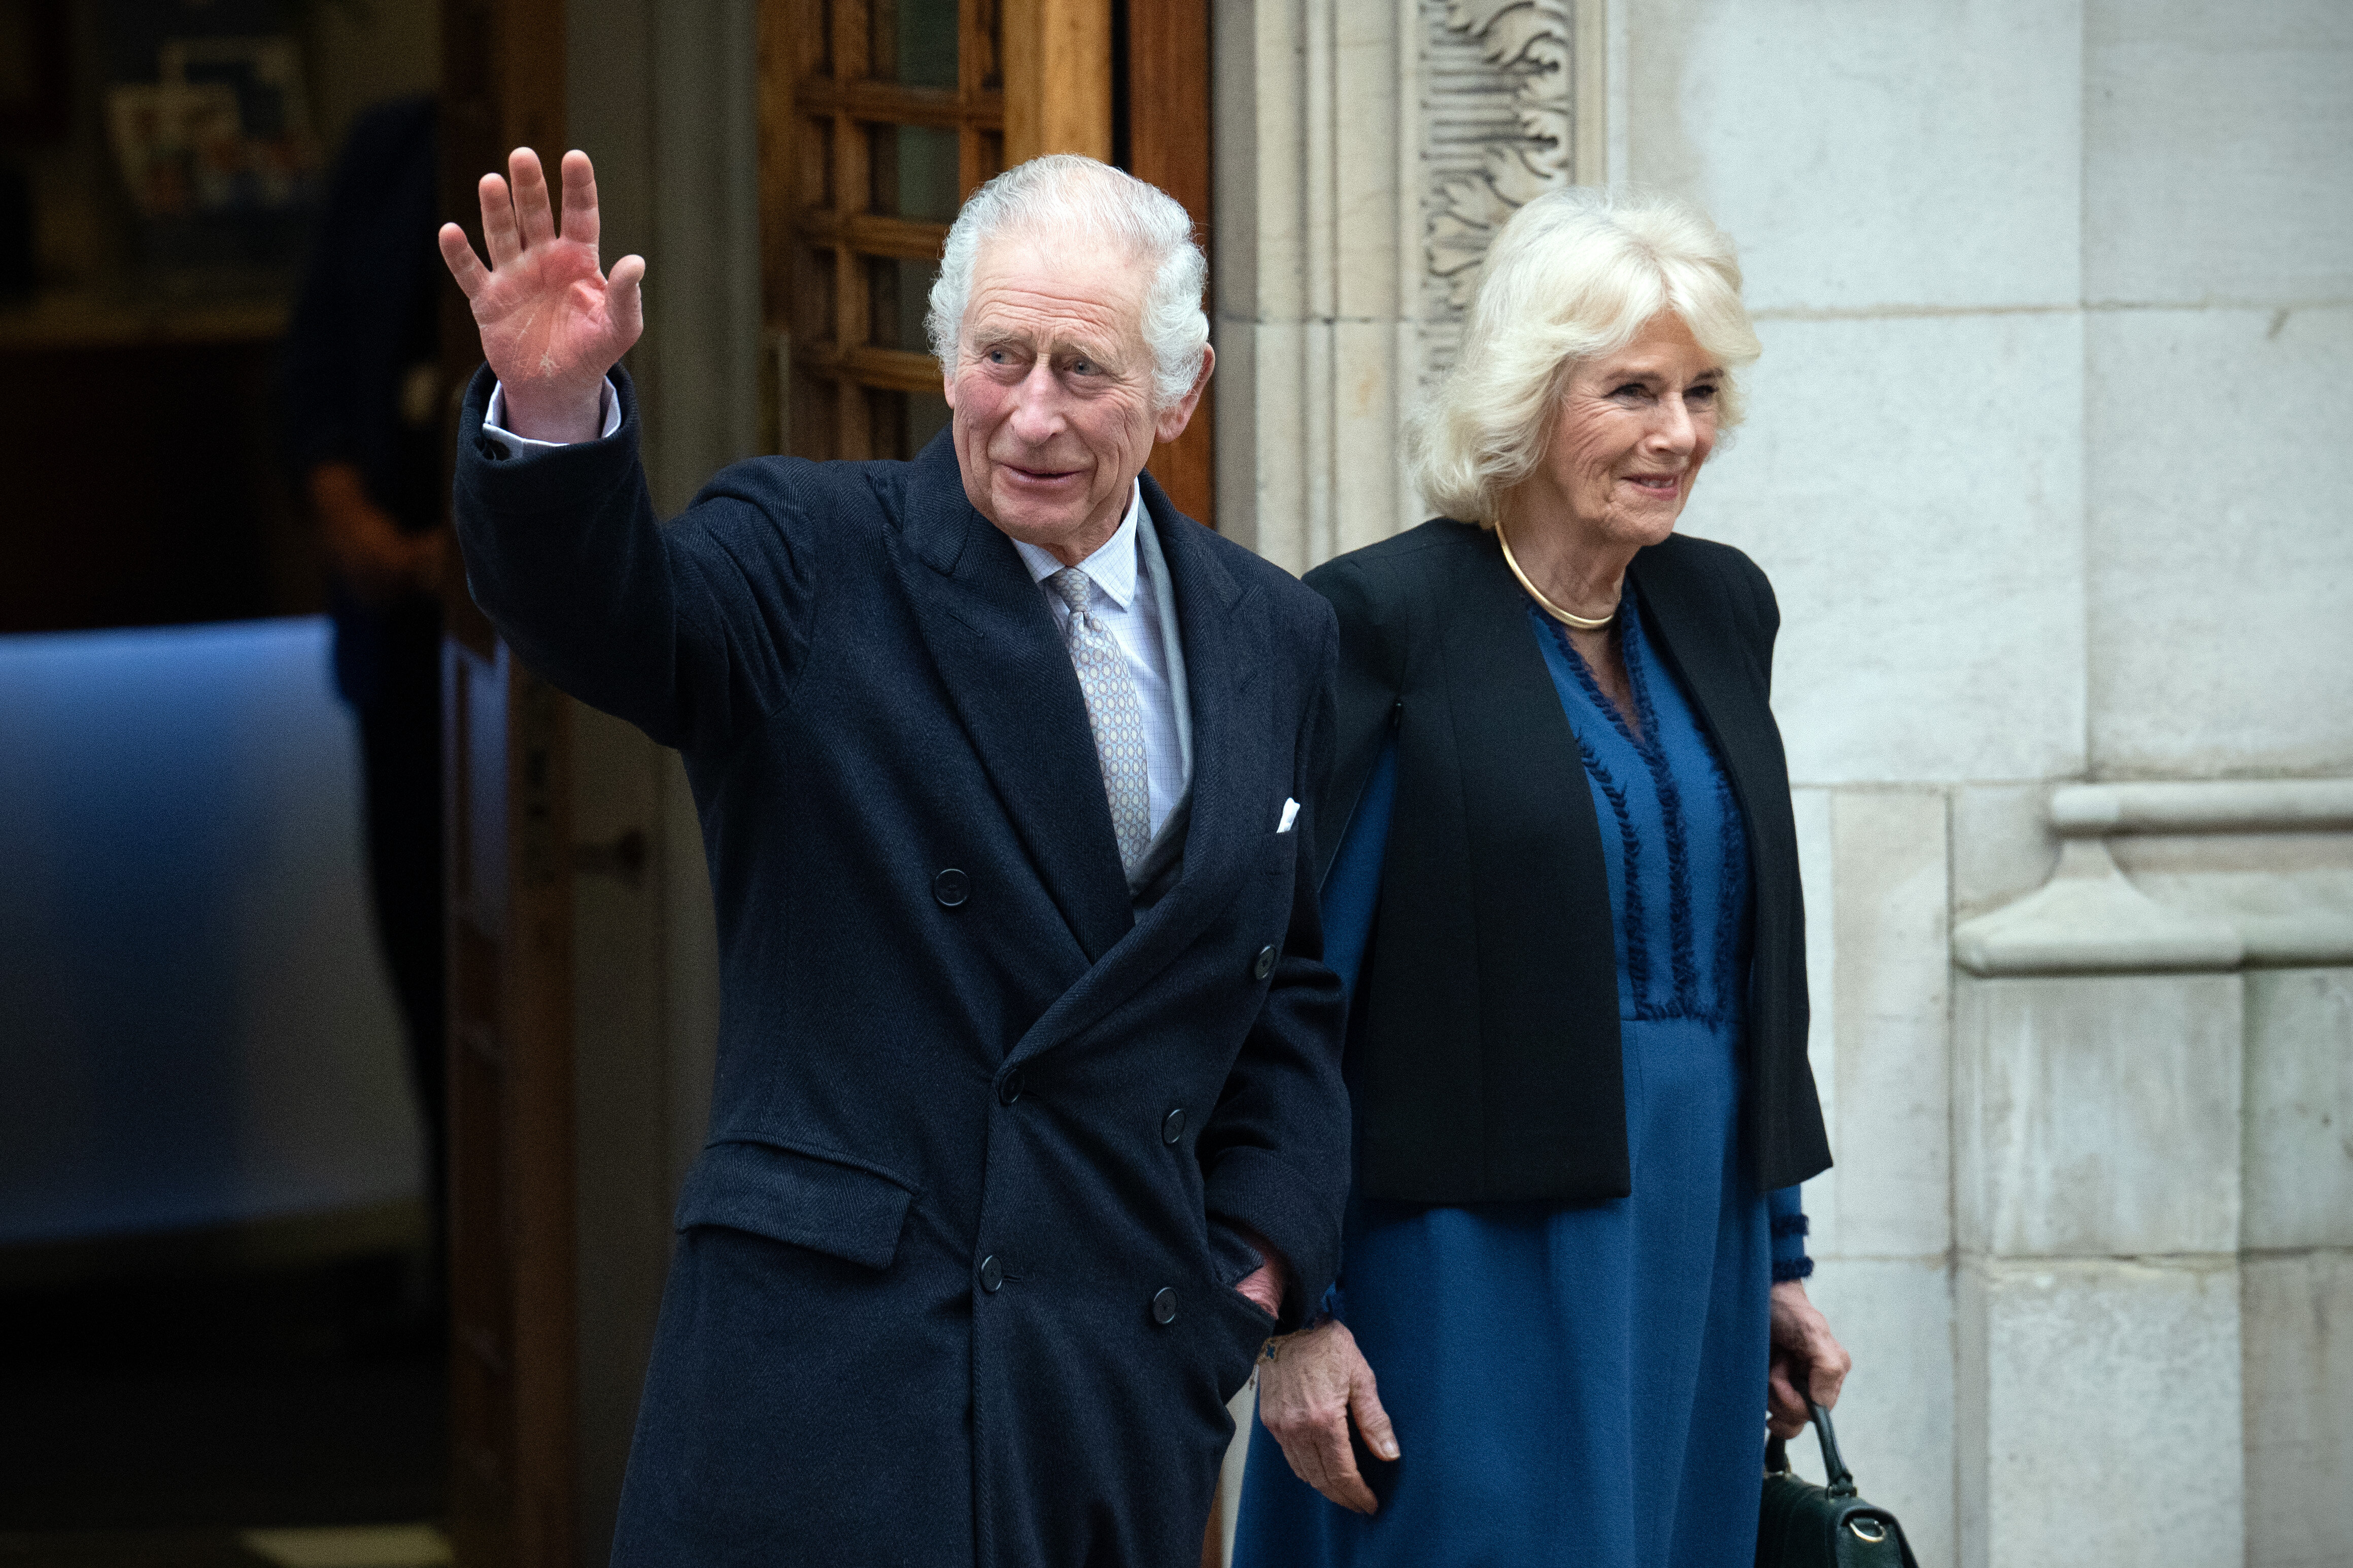 King Charles III waves as he departs with Queen Camilla after receiving treatment for an enlarged prostate at The London Clinic on Jan. 29